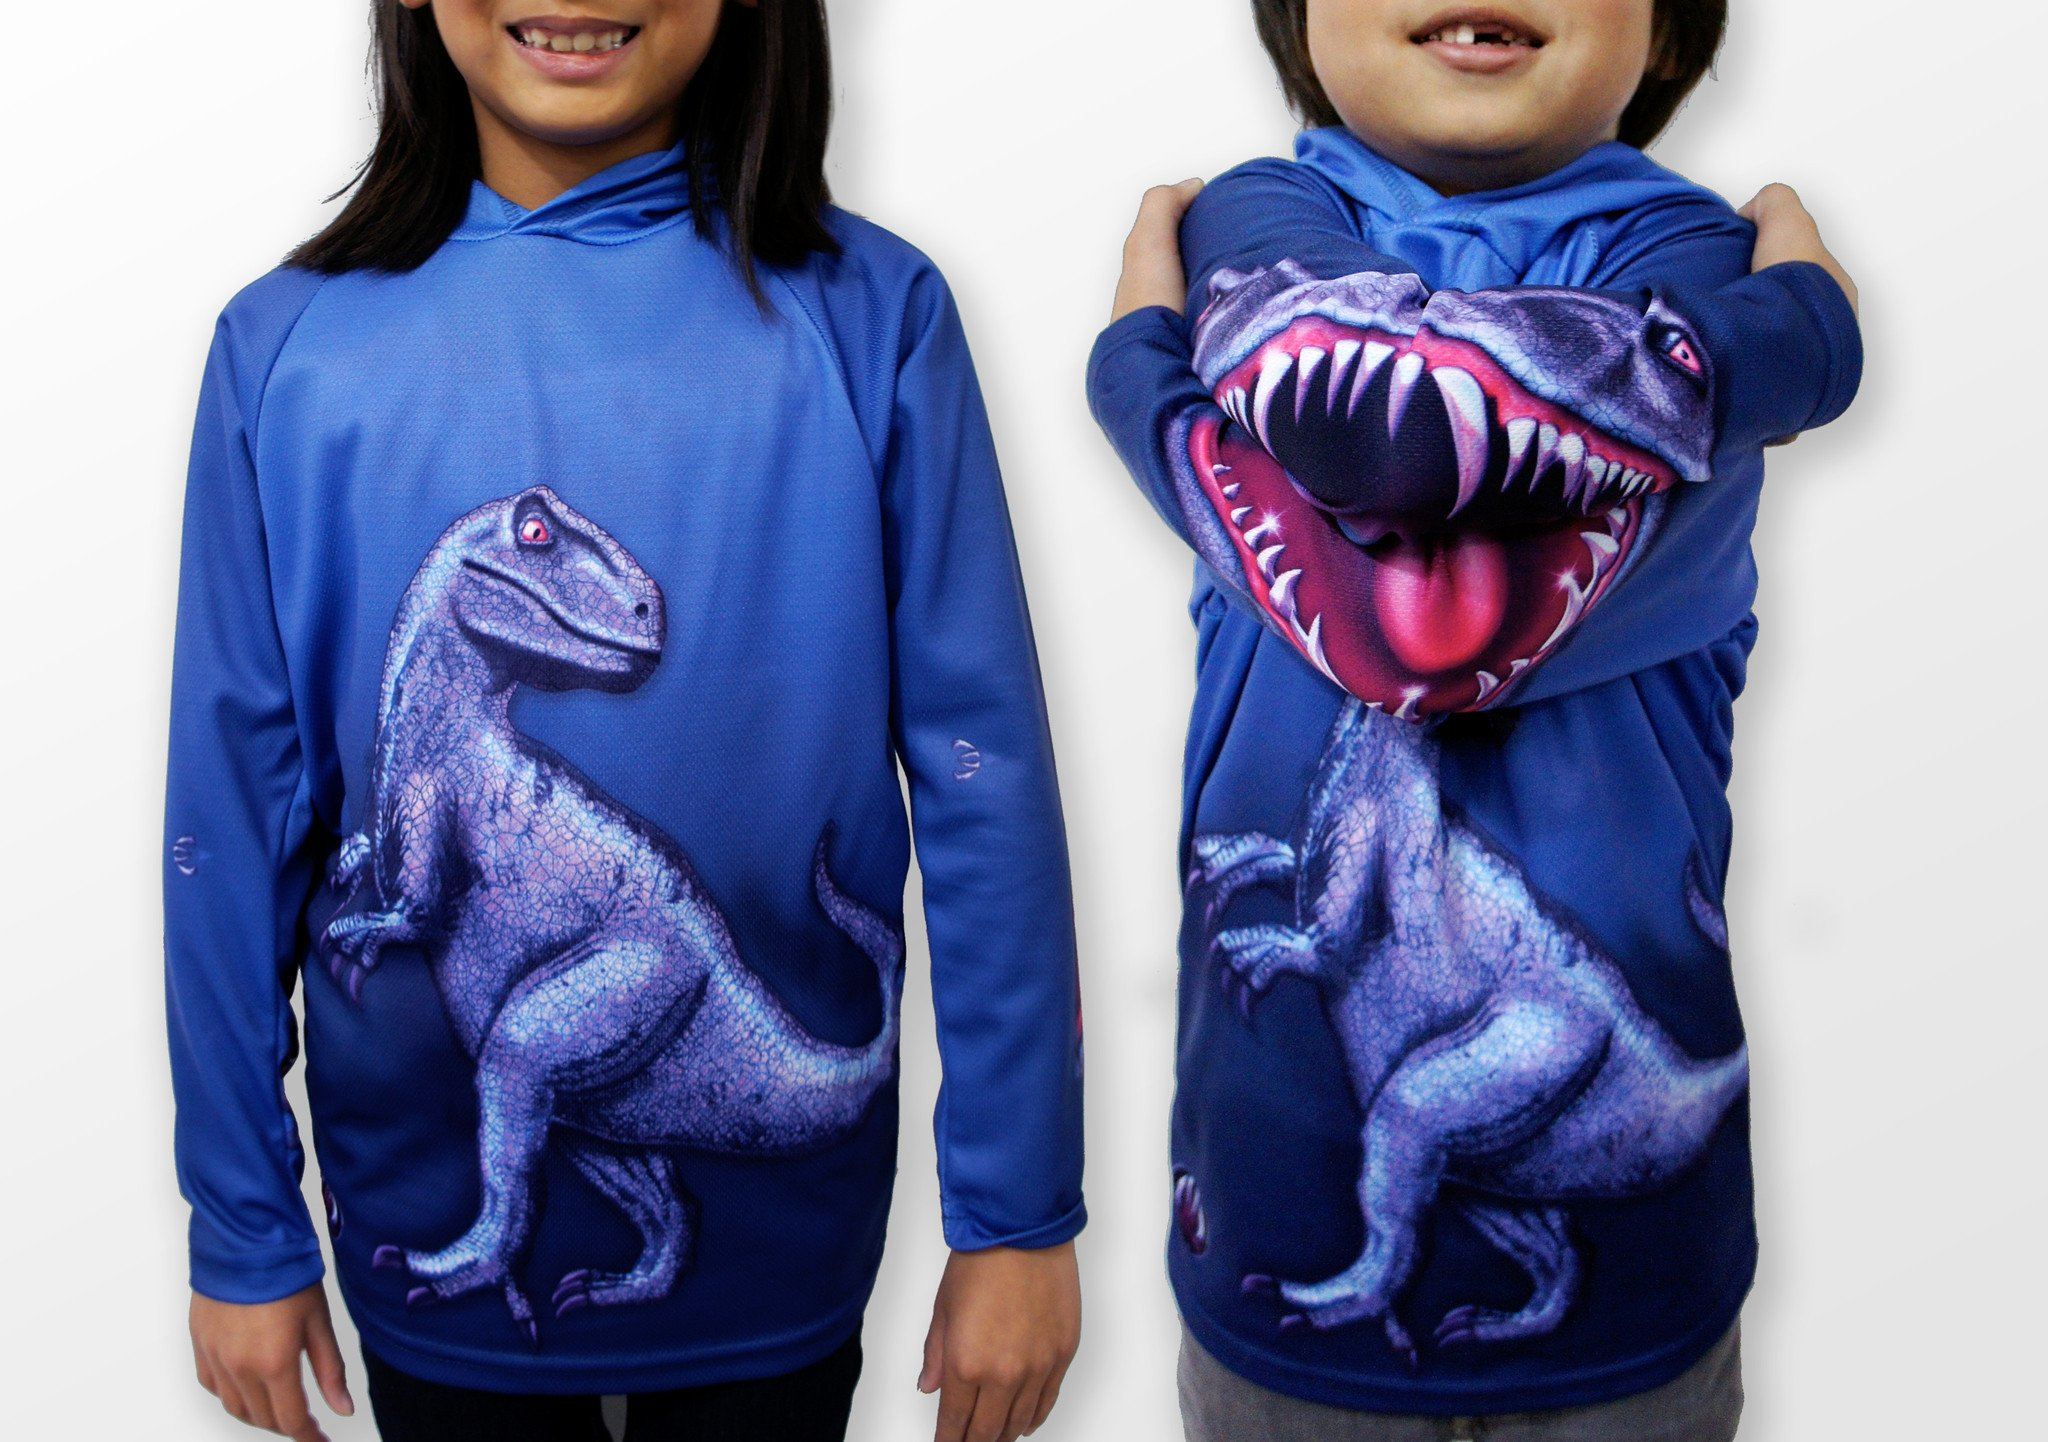 RAPTOR-IN-BLUE Hoodie Sport Shirt by MOUTHMAN® Kid's Clothing 